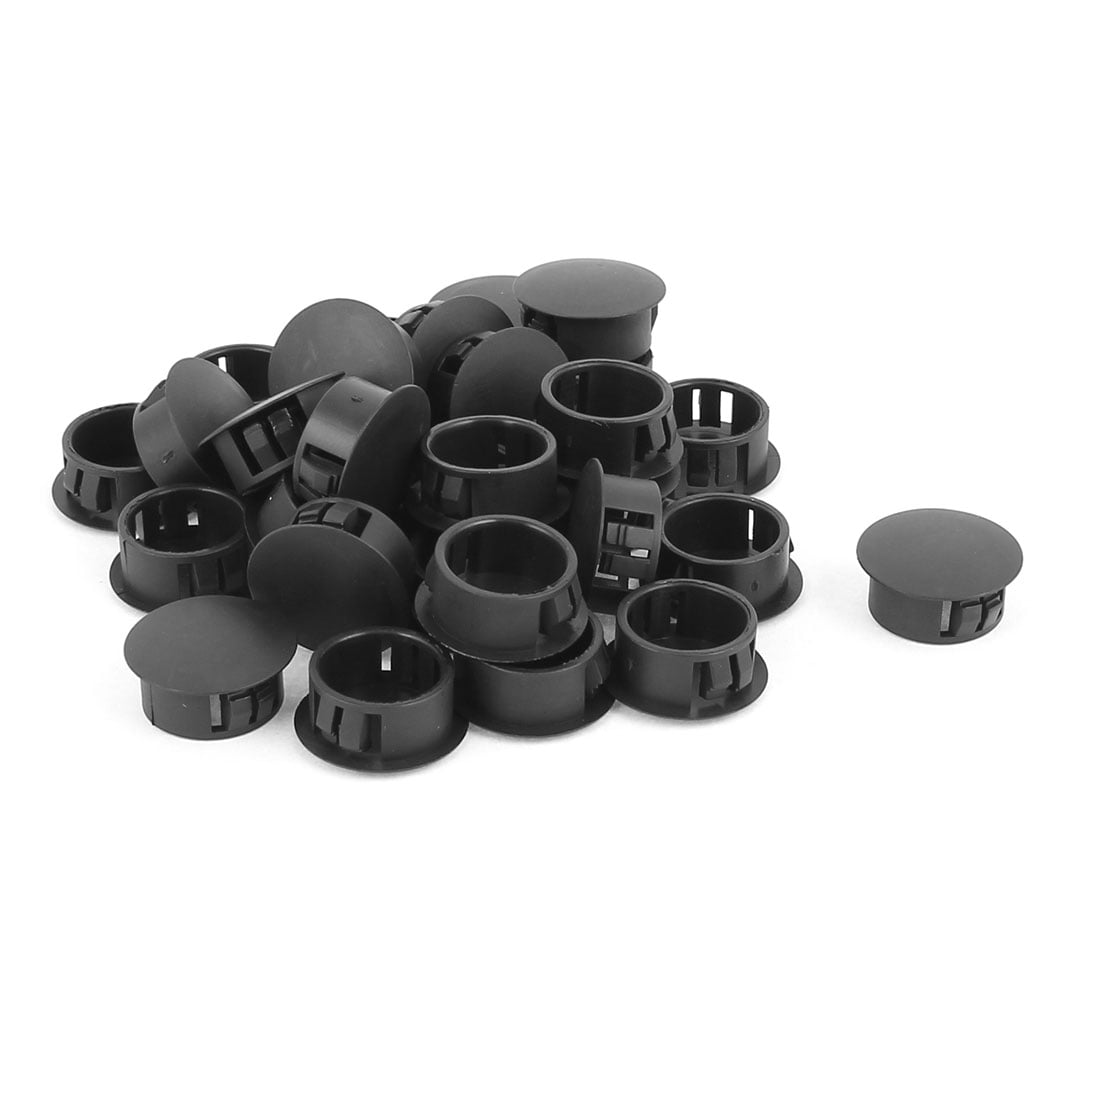 Furniture Table Plastic Pipe End Hole Drilling Cover Plugs Insert Gray 5mm 30pcs 